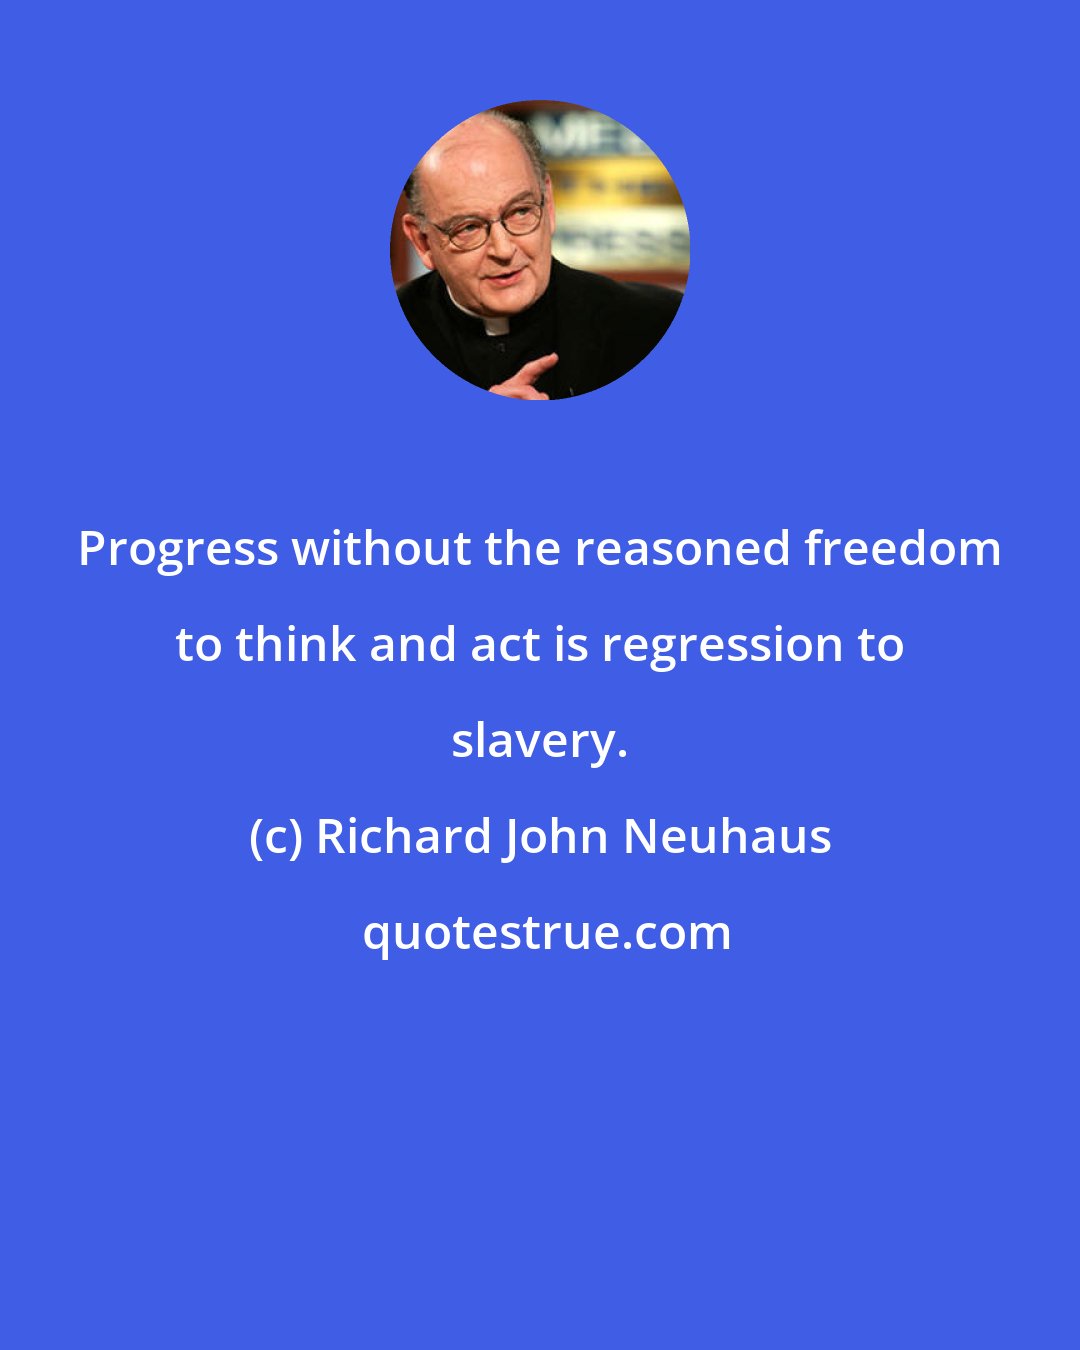 Richard John Neuhaus: Progress without the reasoned freedom to think and act is regression to slavery.